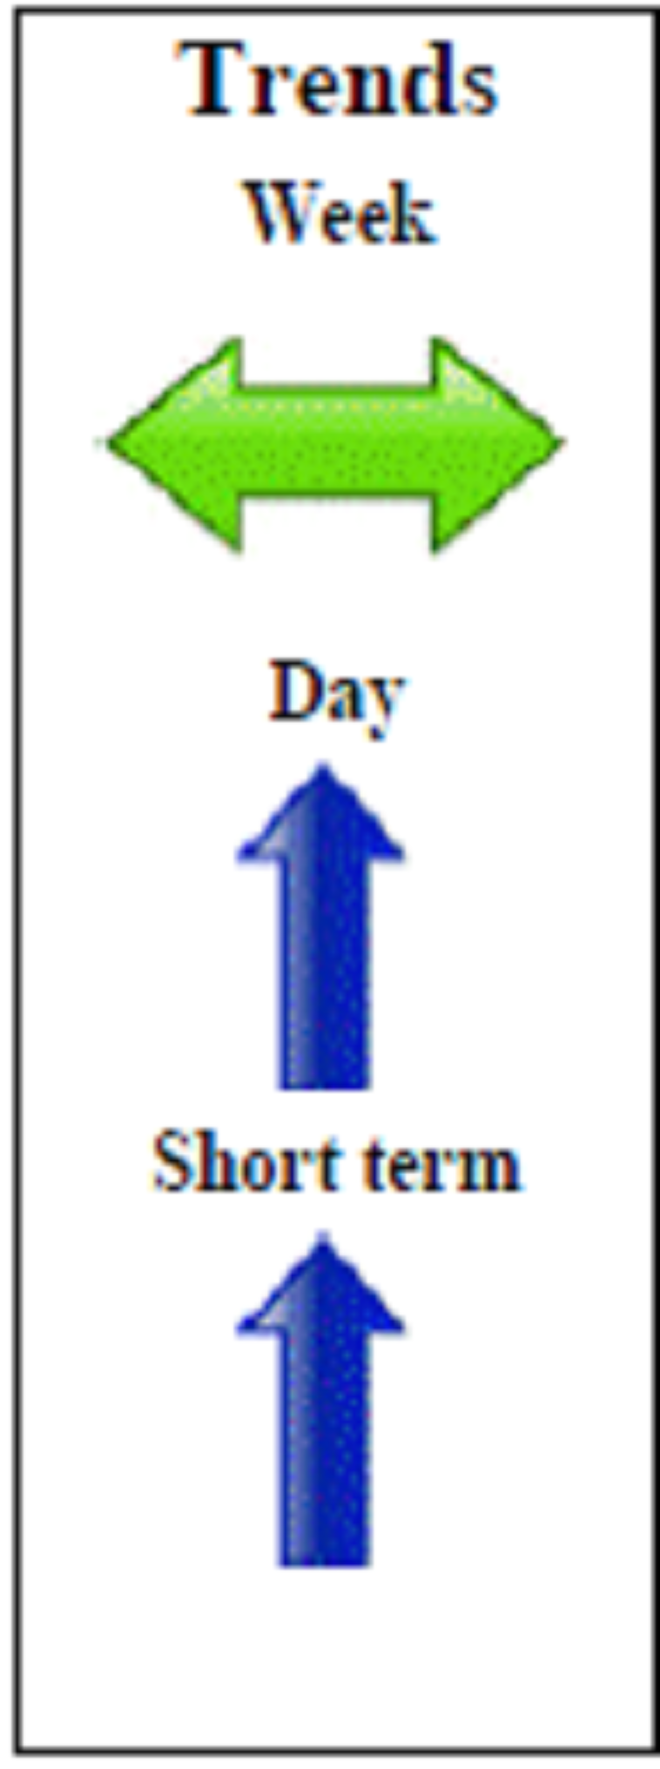 Mini Russell 2000 December contract Daily Forecast – 30 October 2014